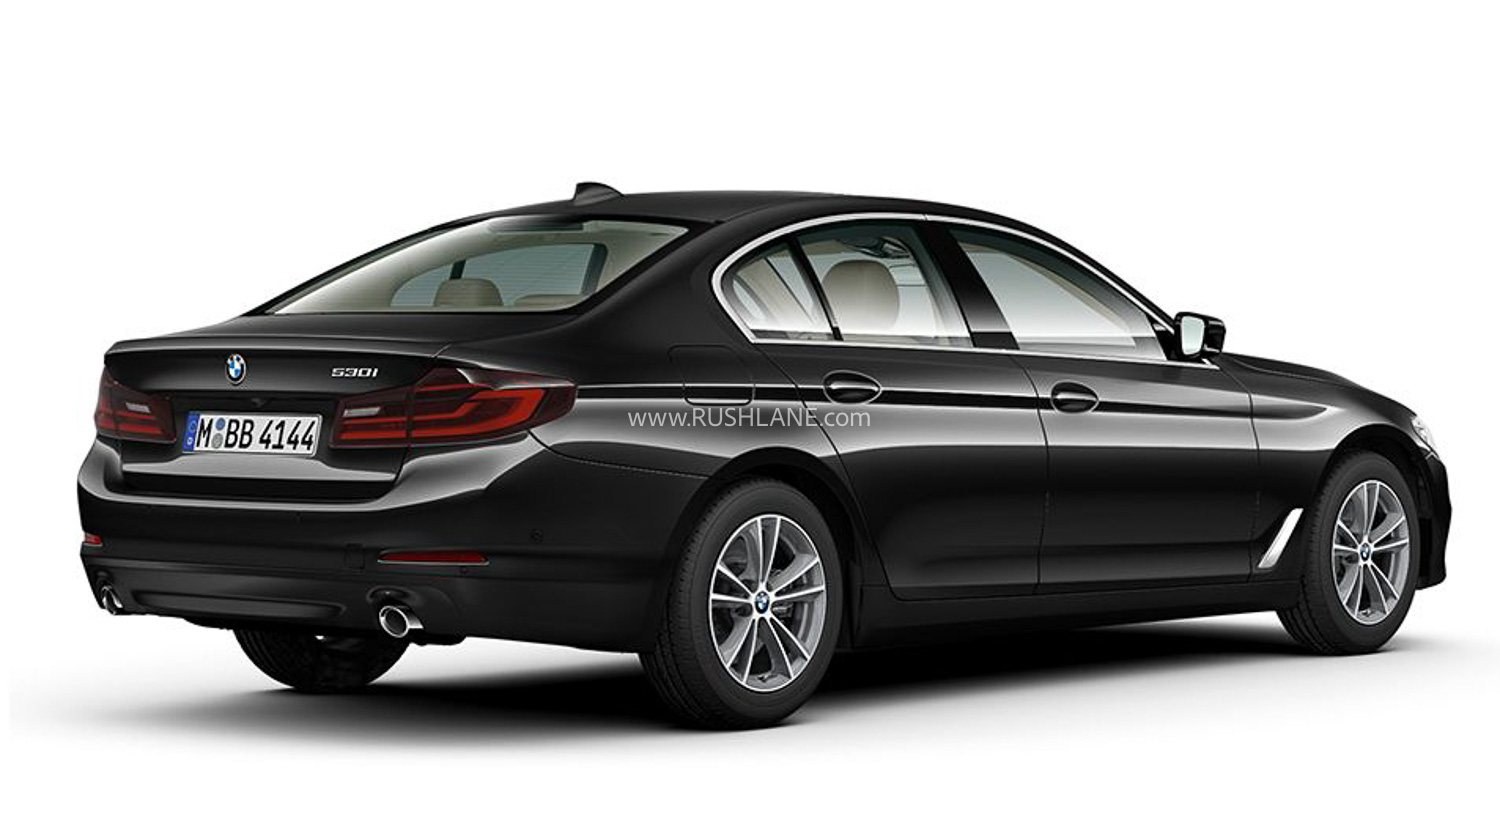 2020 BMW 530i launched